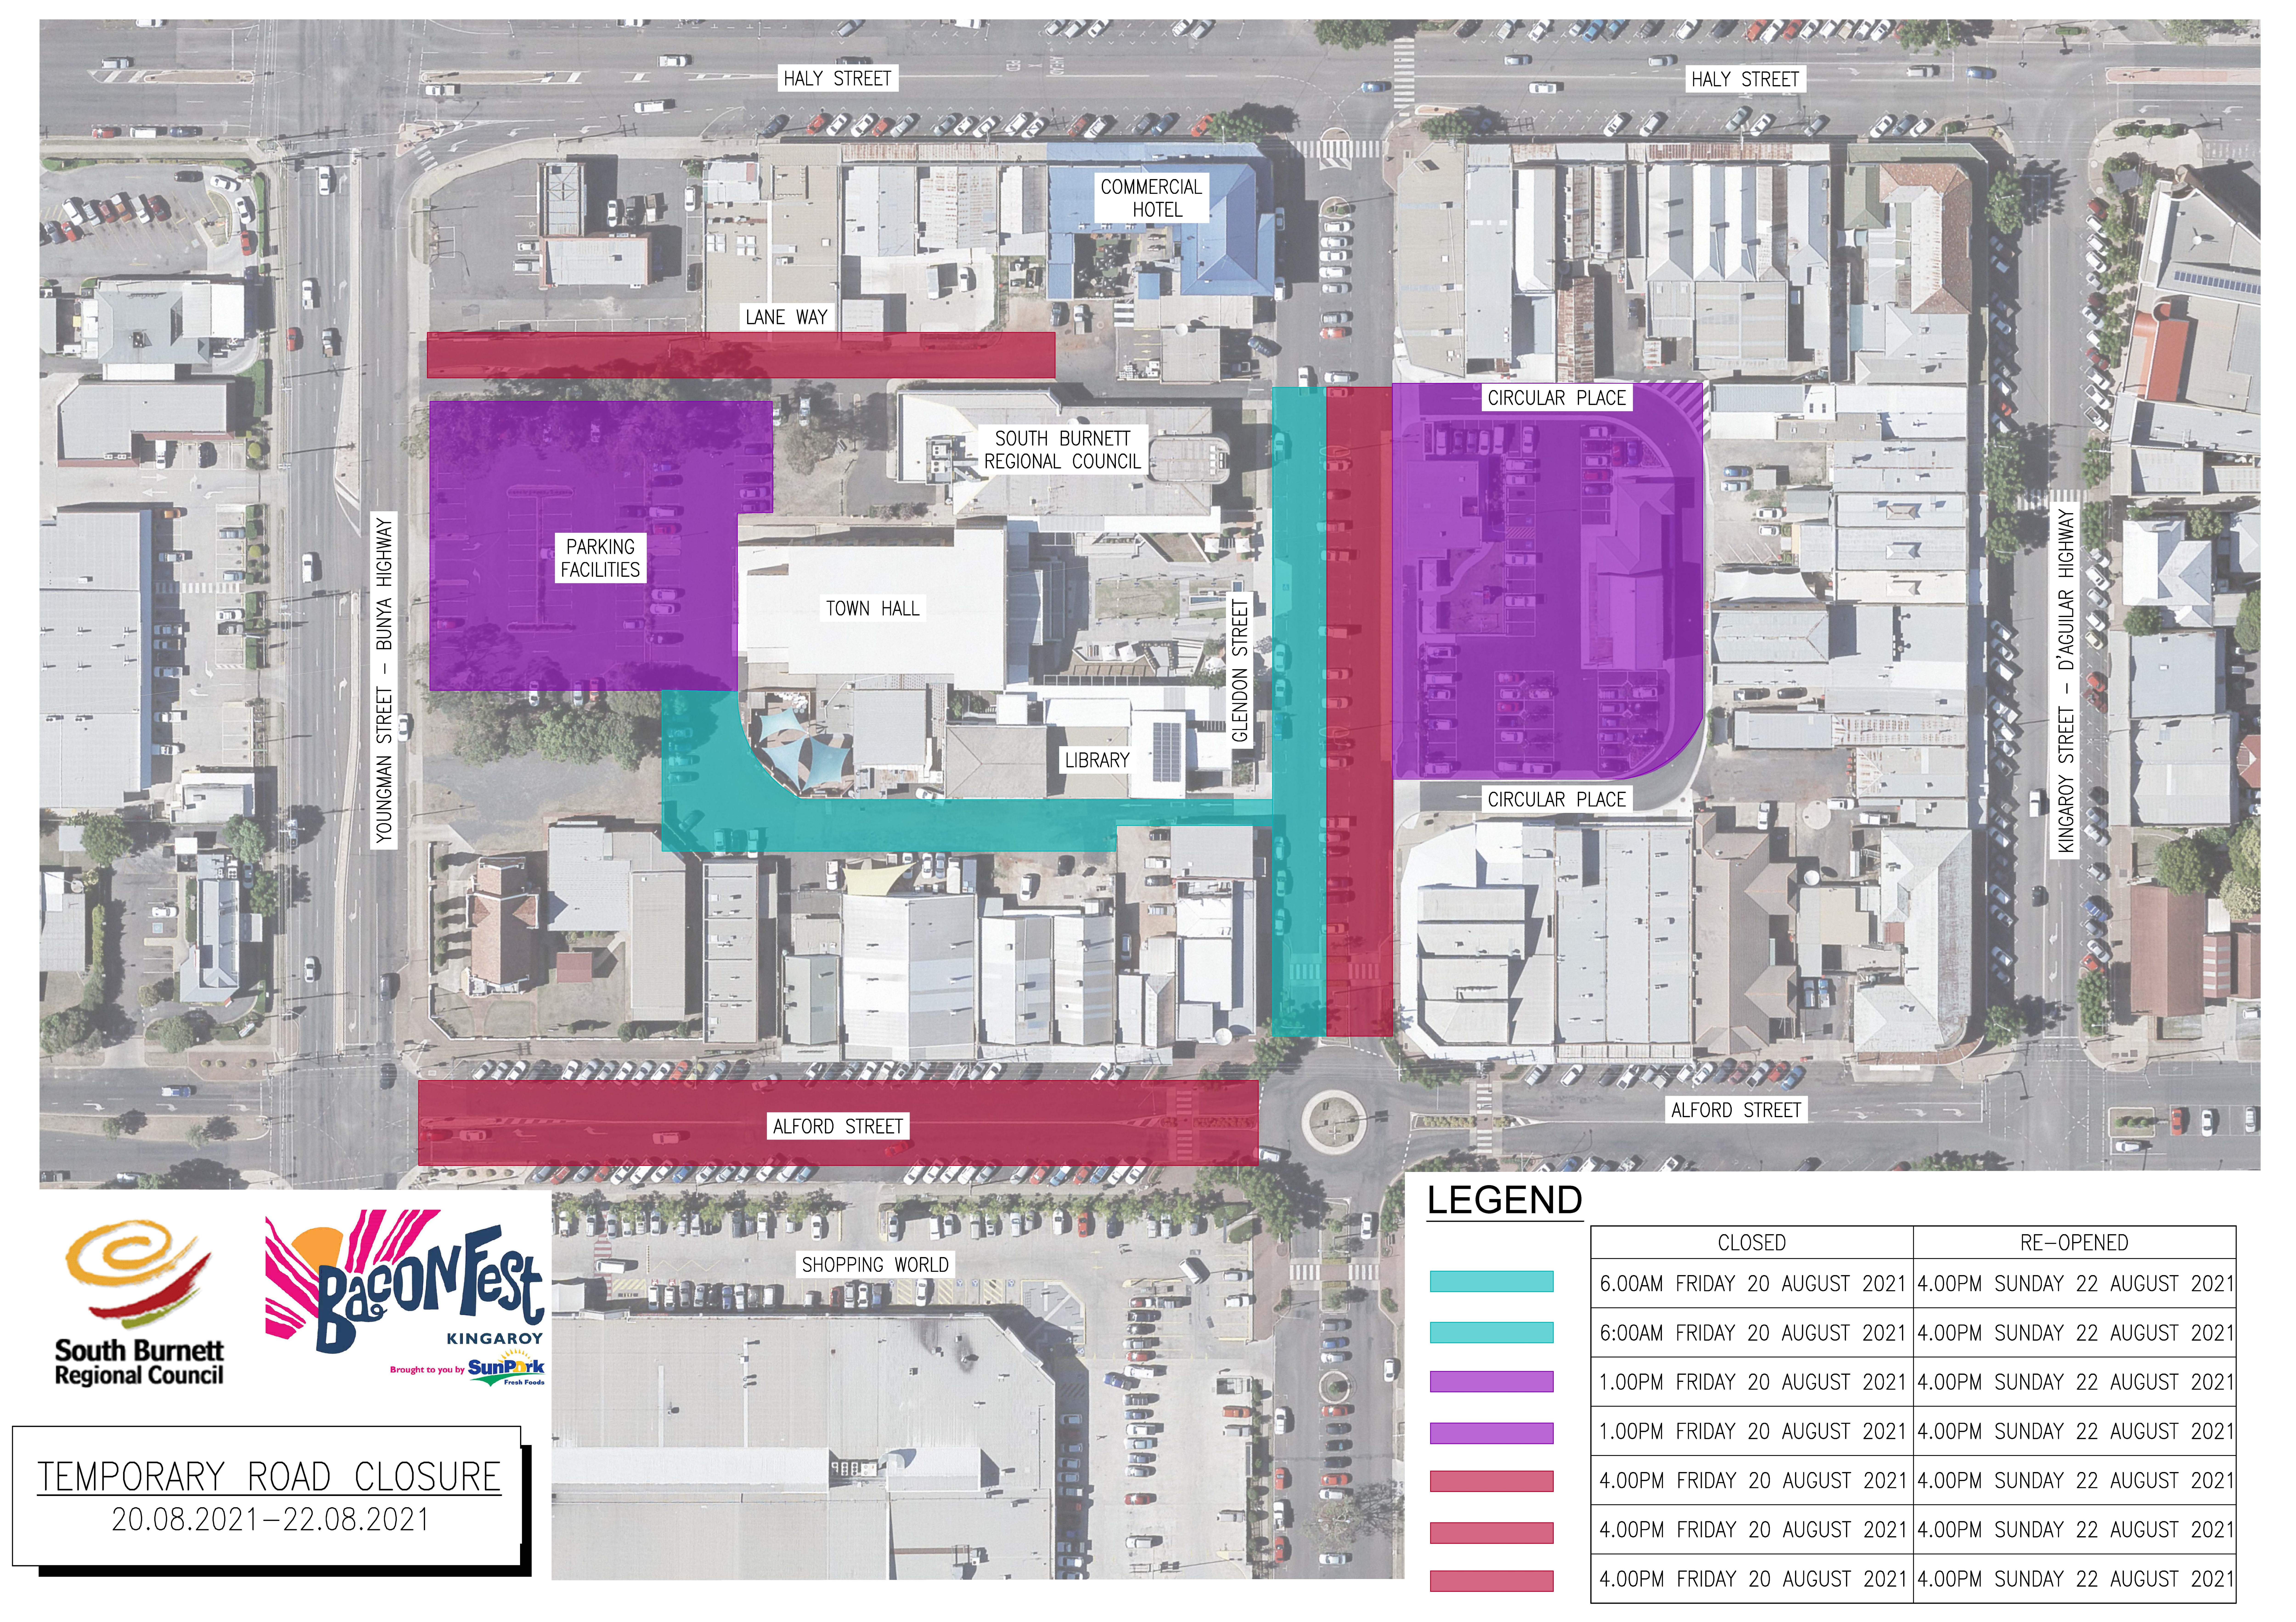 Image: Temporary road closures map for BaconFest 2021